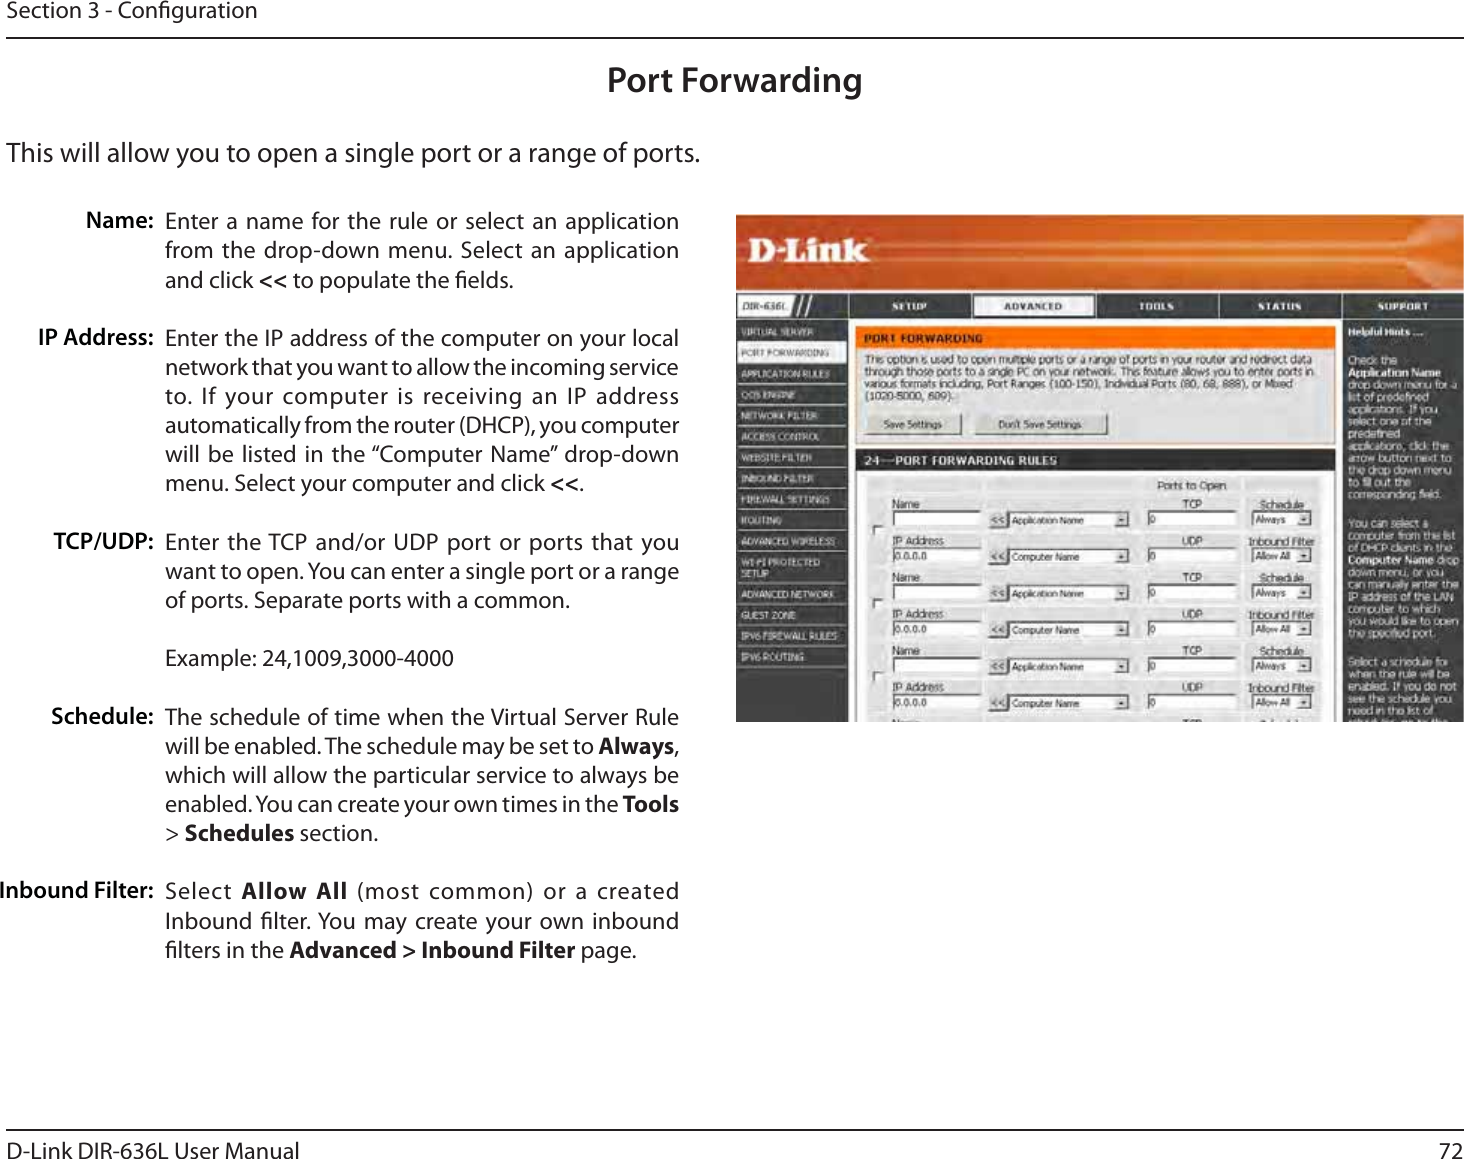 72D-Link DIR-636L User ManualSection 3 - CongurationThis will allow you to open a single port or a range of ports.Port ForwardingEnter a name for the rule or select an application from the drop-down menu. Select an application and click &lt;&lt; to populate the elds.Enter the IP address of the computer on your local network that you want to allow the incoming service to. If your computer is receiving an IP address automatically from the router (DHCP), you computer will be listed in the “Computer Name” drop-down menu. Select your computer and click &lt;&lt;. Enter the TCP and/or UDP port or ports that you want to open. You can enter a single port or a range of ports. Separate ports with a common.Example: 24,1009,3000-4000The schedule of time when the Virtual Server Rule will be enabled. The schedule may be set to Always, which will allow the particular service to always be enabled. You can create your own times in the Tools &gt; Schedules section.Select  Allow All (most common) or a created Inbound lter. You may create your own inbound lters in the Advanced &gt; Inbound Filter page.Name:IP Address:TCP/UDP:Schedule:Inbound Filter: